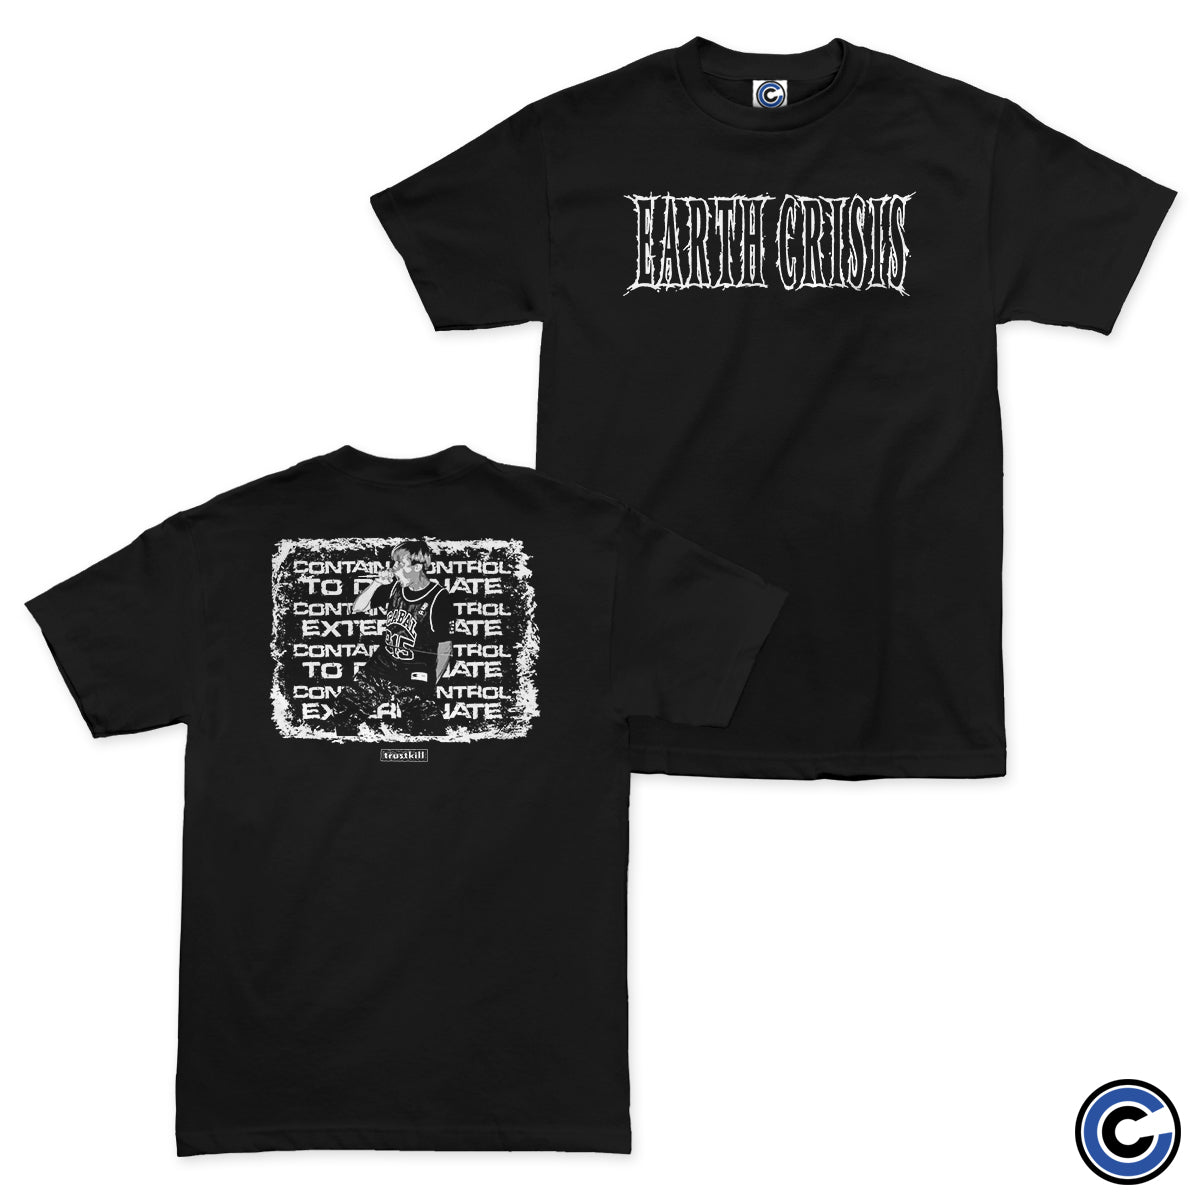 Trustkill Records "Earth Crisis - Breed The Killers" Shirt